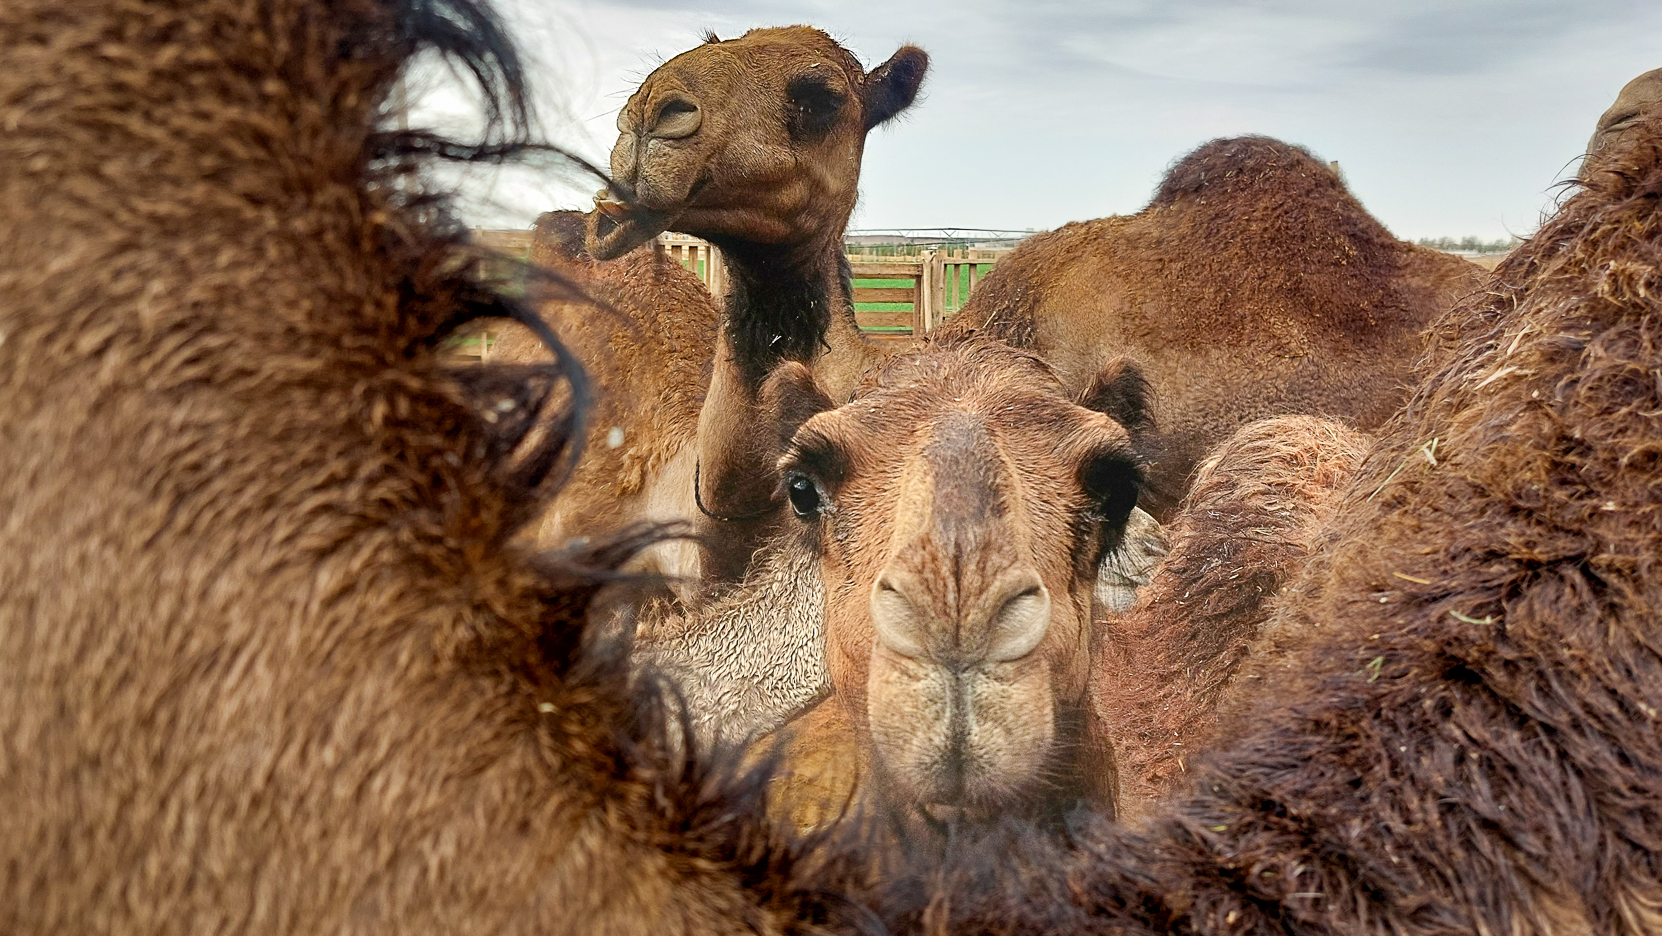 <span  class="uc_style_uc_tiles_grid_image_elementor_uc_items_attribute_title" style="color:#ffffff;">having camels is a sigh of wealth in the Arabic world, the more you have, the higher you are ranked in the local society</span>